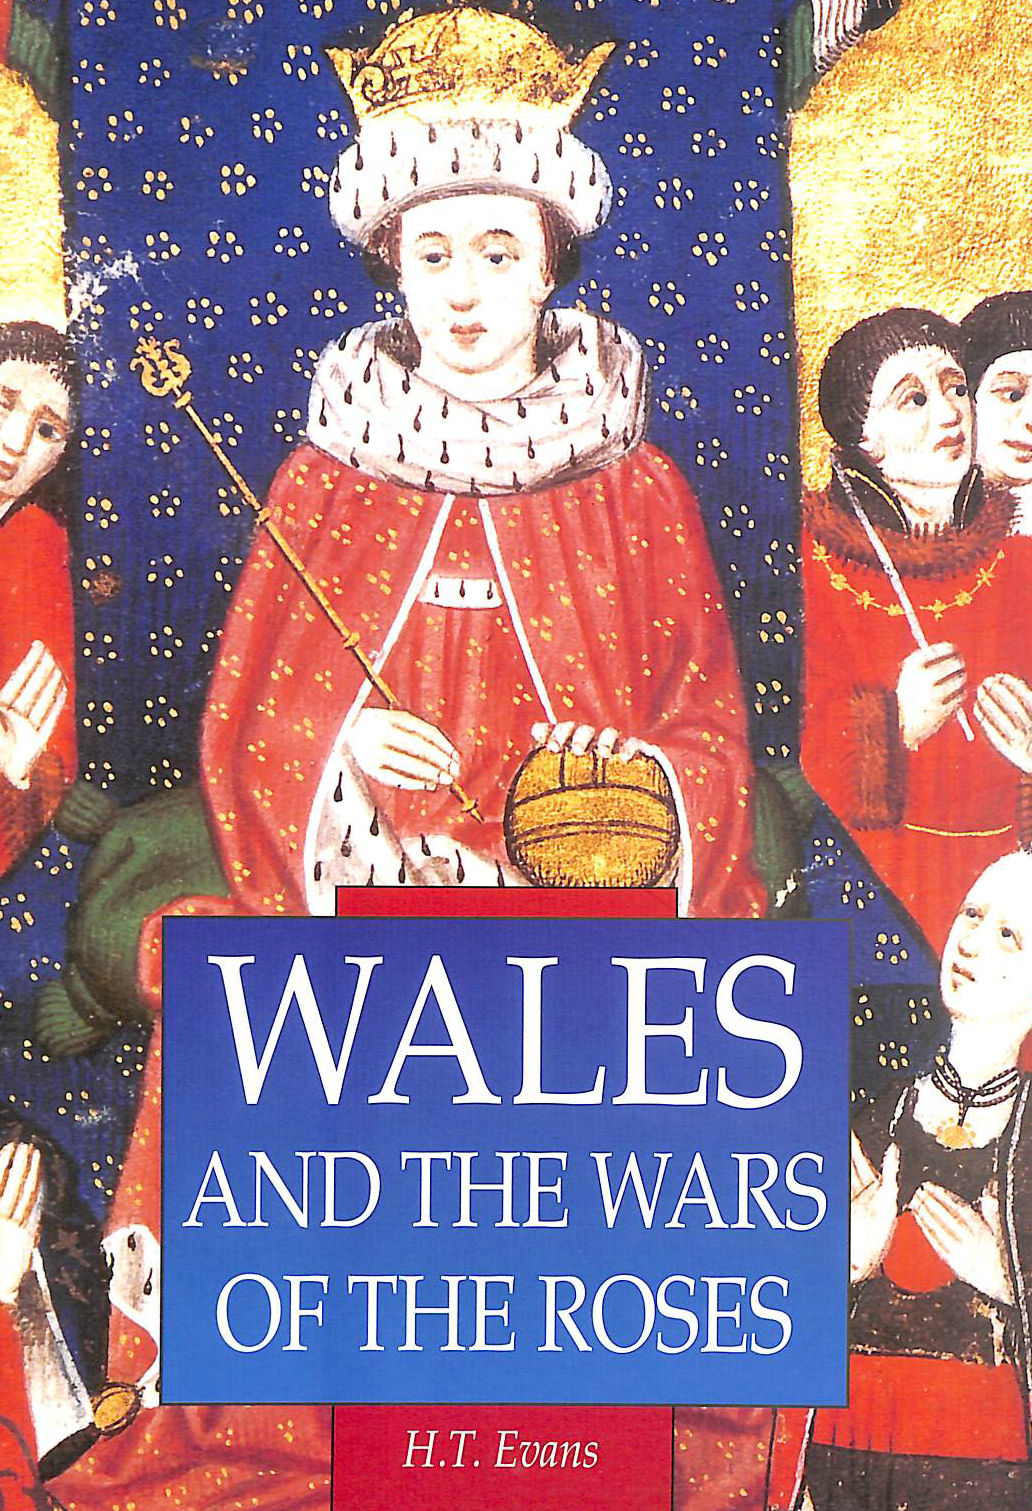 EVANS, H. T.; GRIFFITHS, R. A. [INTRODUCTION] - Wales and the Wars of the Roses (Sutton Illustrated History Paperbacks)